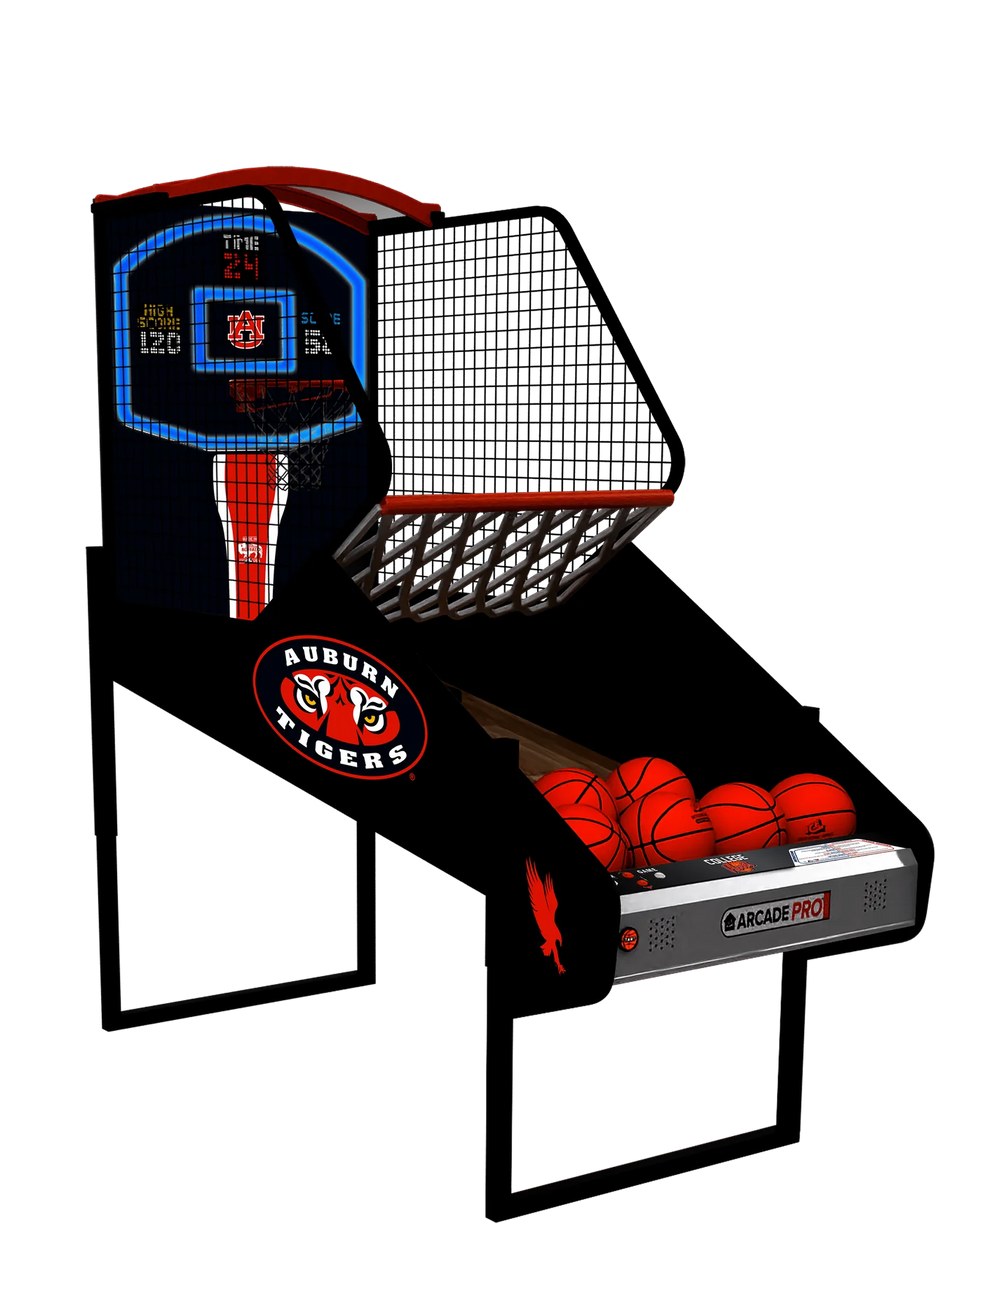 ICE College Game Hoops Pro Basketball Arcade Game-Arcade Games-ICE-Ole Miss Mississippi-Game Room Shop